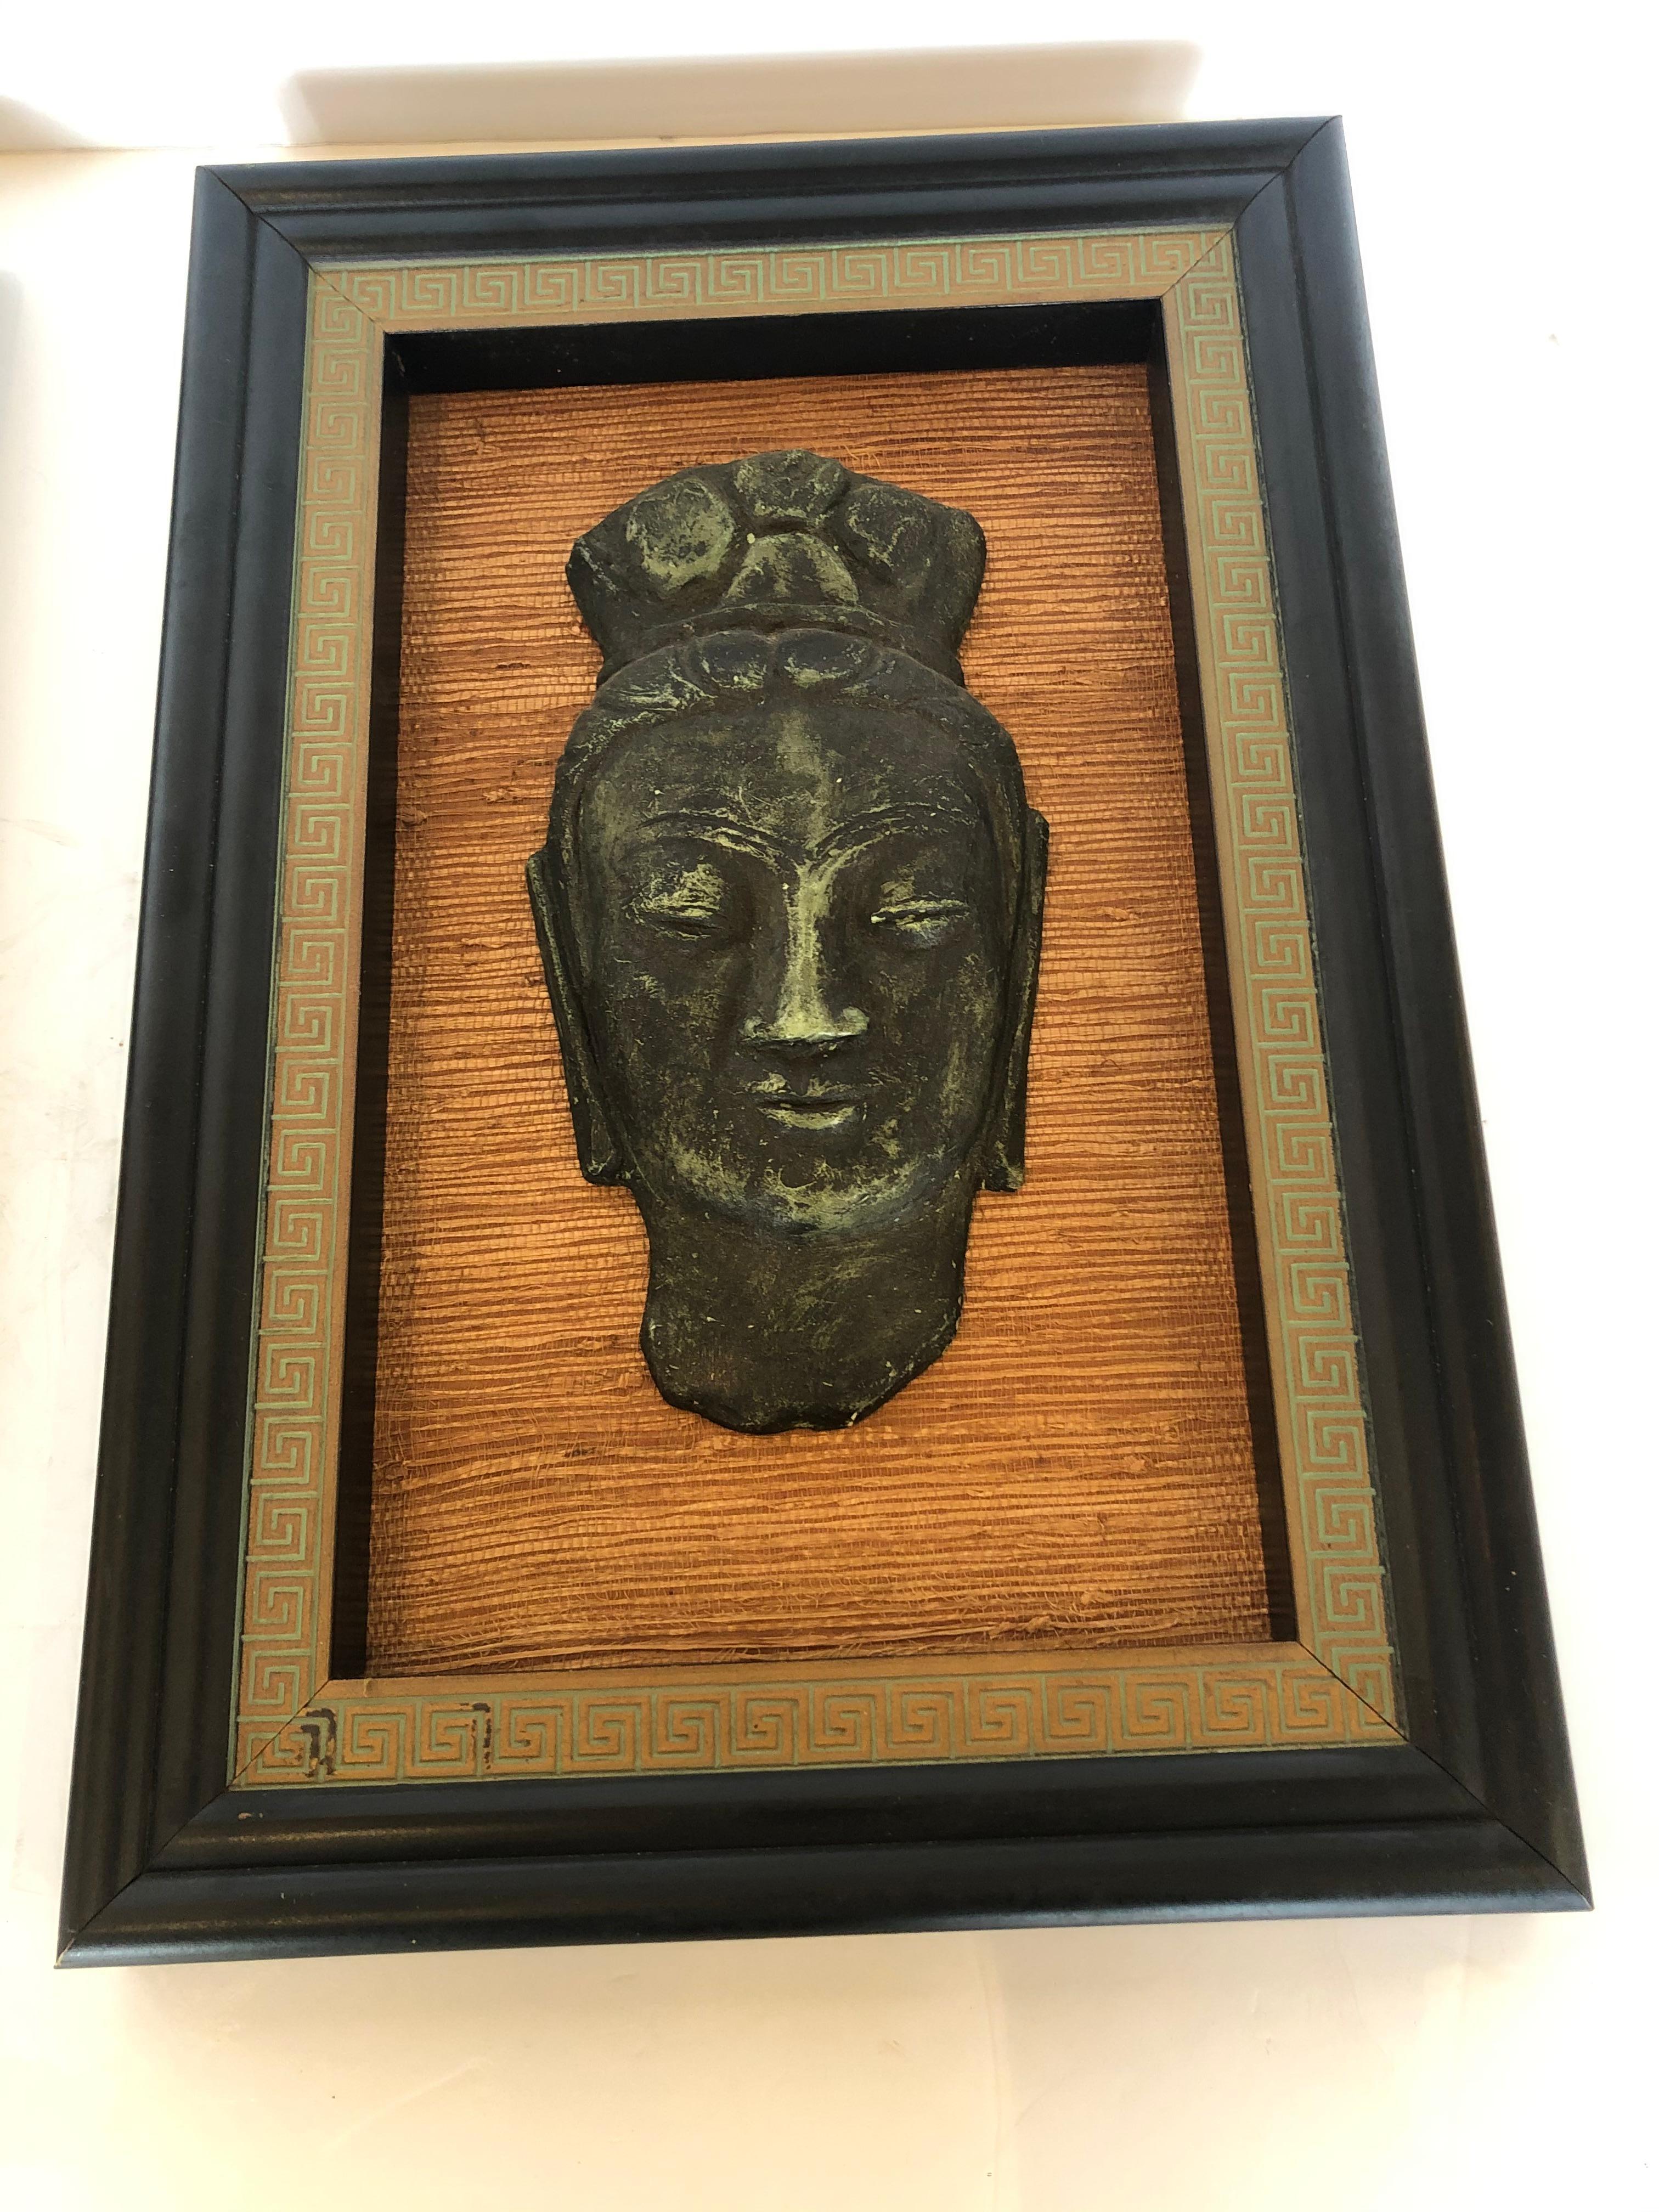 A superb pair of Hollywood Regency sculptural relief Buddha heads mounted on grasscloth backgrounds and framed stylishly in ebonized frames with gold and celadon green Greek key borders. Tony Duquette would have loved these.